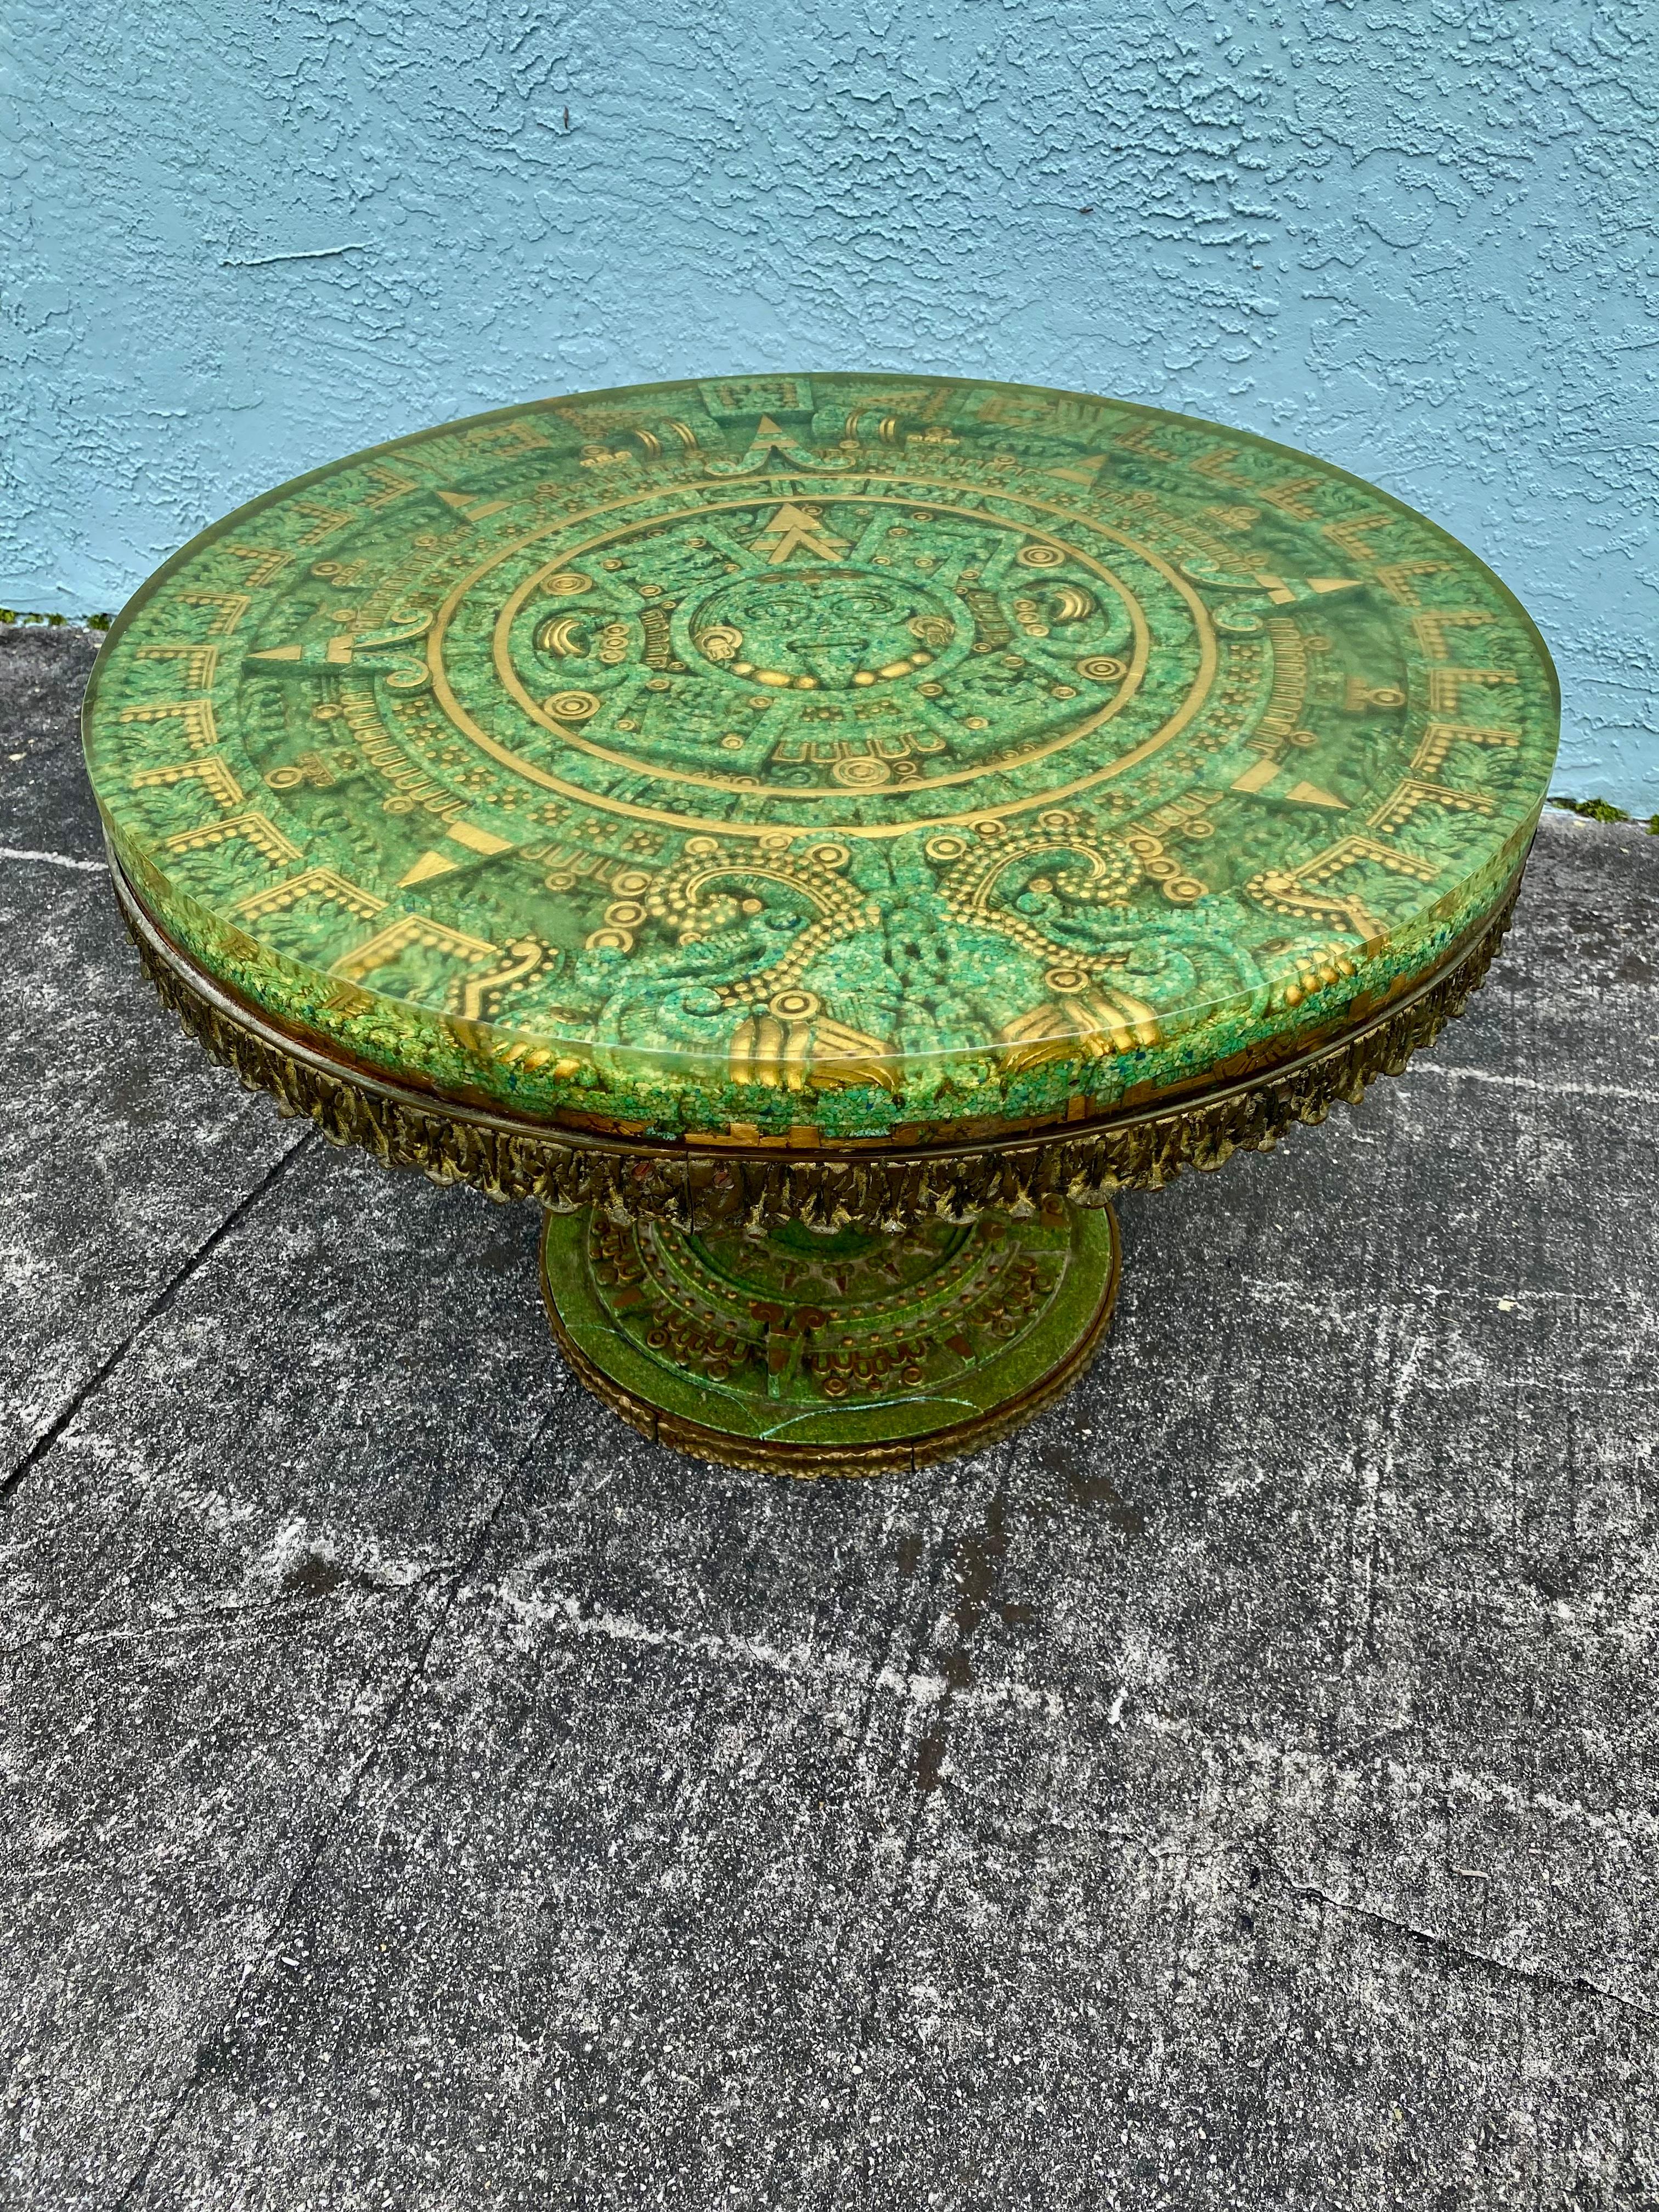 Sculpted Inlay Malachite Brutalist Bronze Wood Stone Resin Aztec Circular Table  For Sale 31